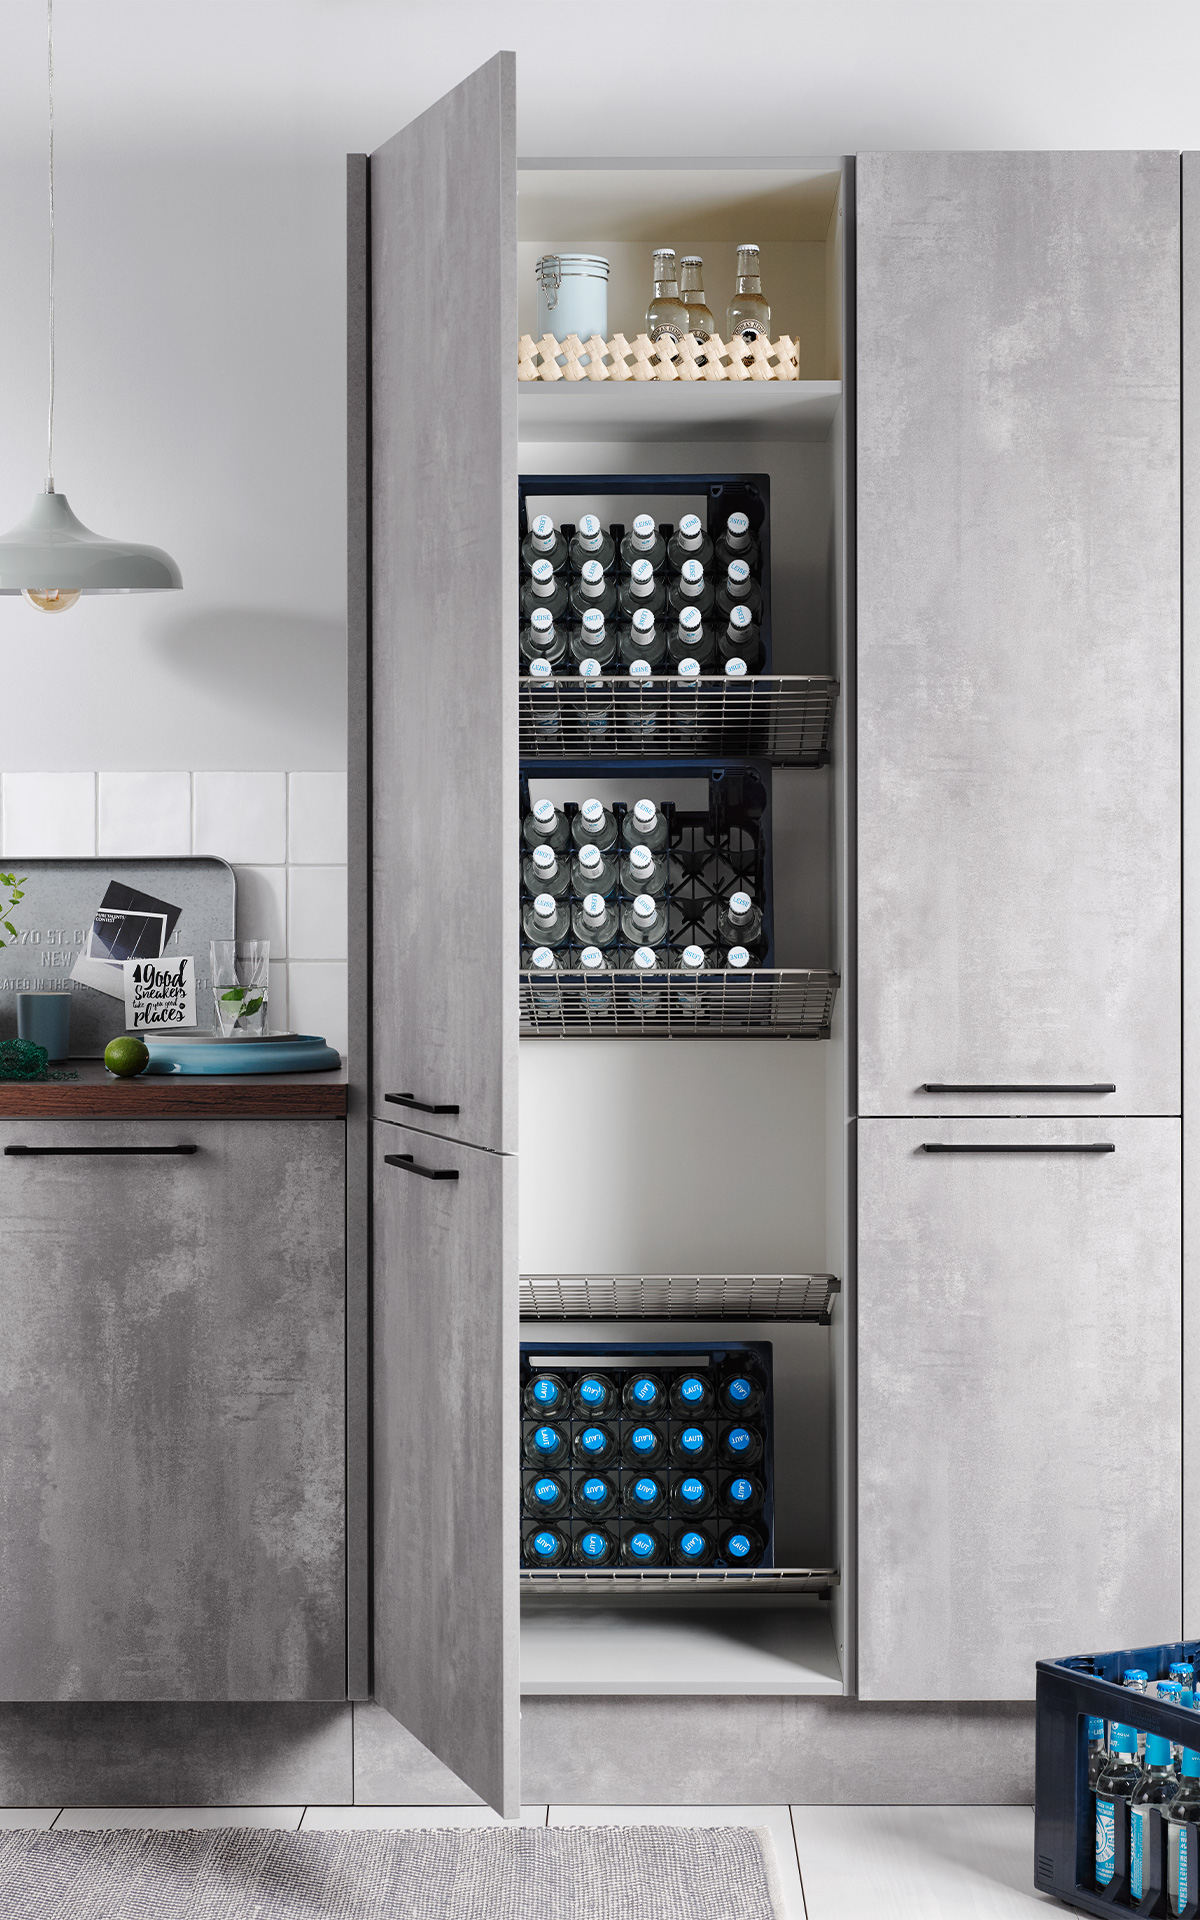 Interior organisation from Häcker organisation for kitchen miracle becomes Your kitchen. with new a your smart spatial